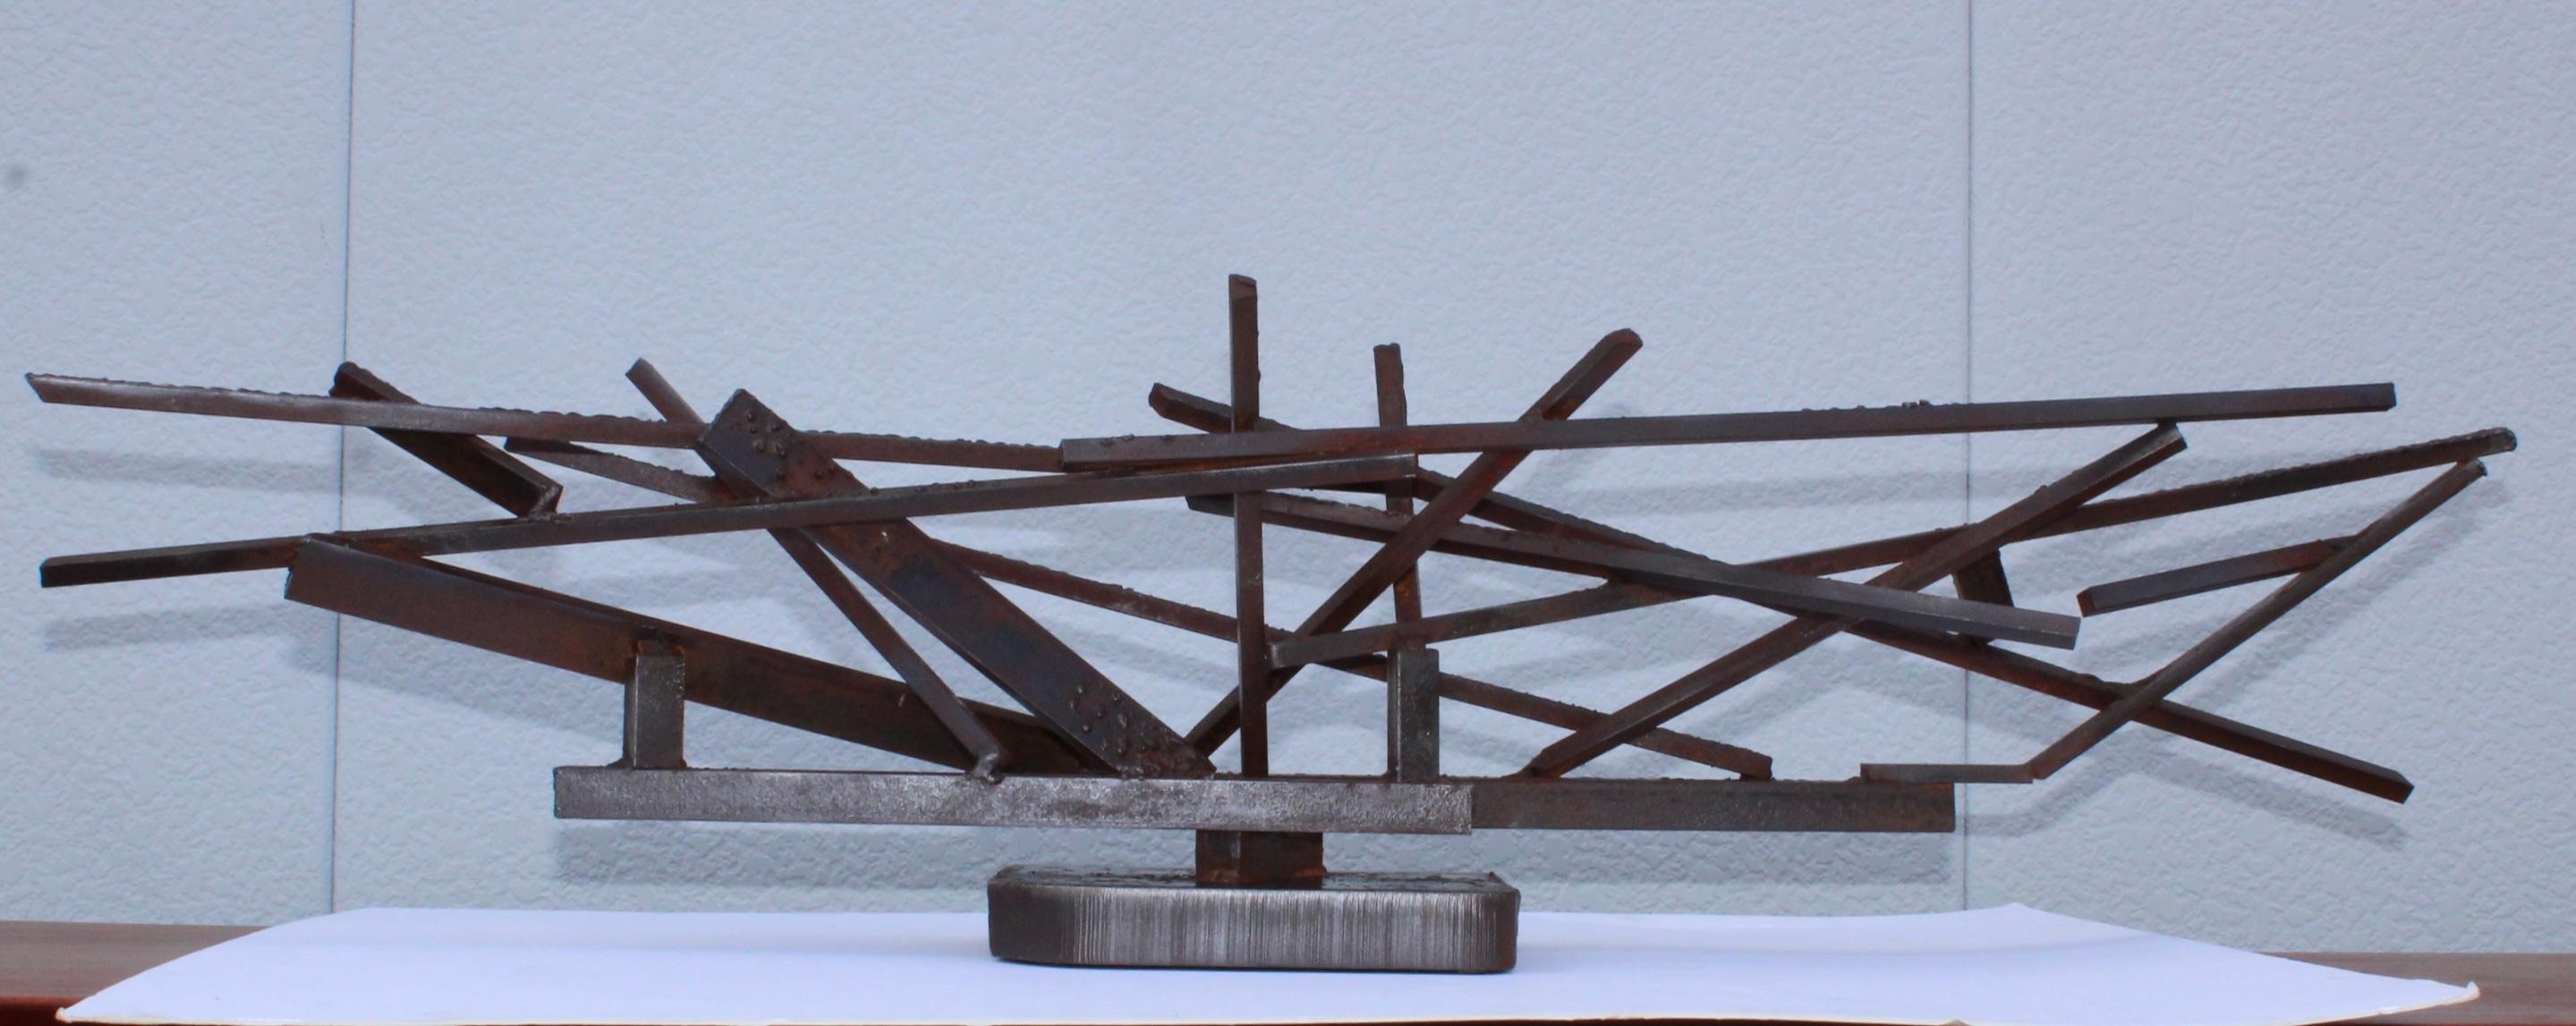 Stunning oversize 1960s welded steel modernist sculpture. In vintage original condition with some wear and patina.